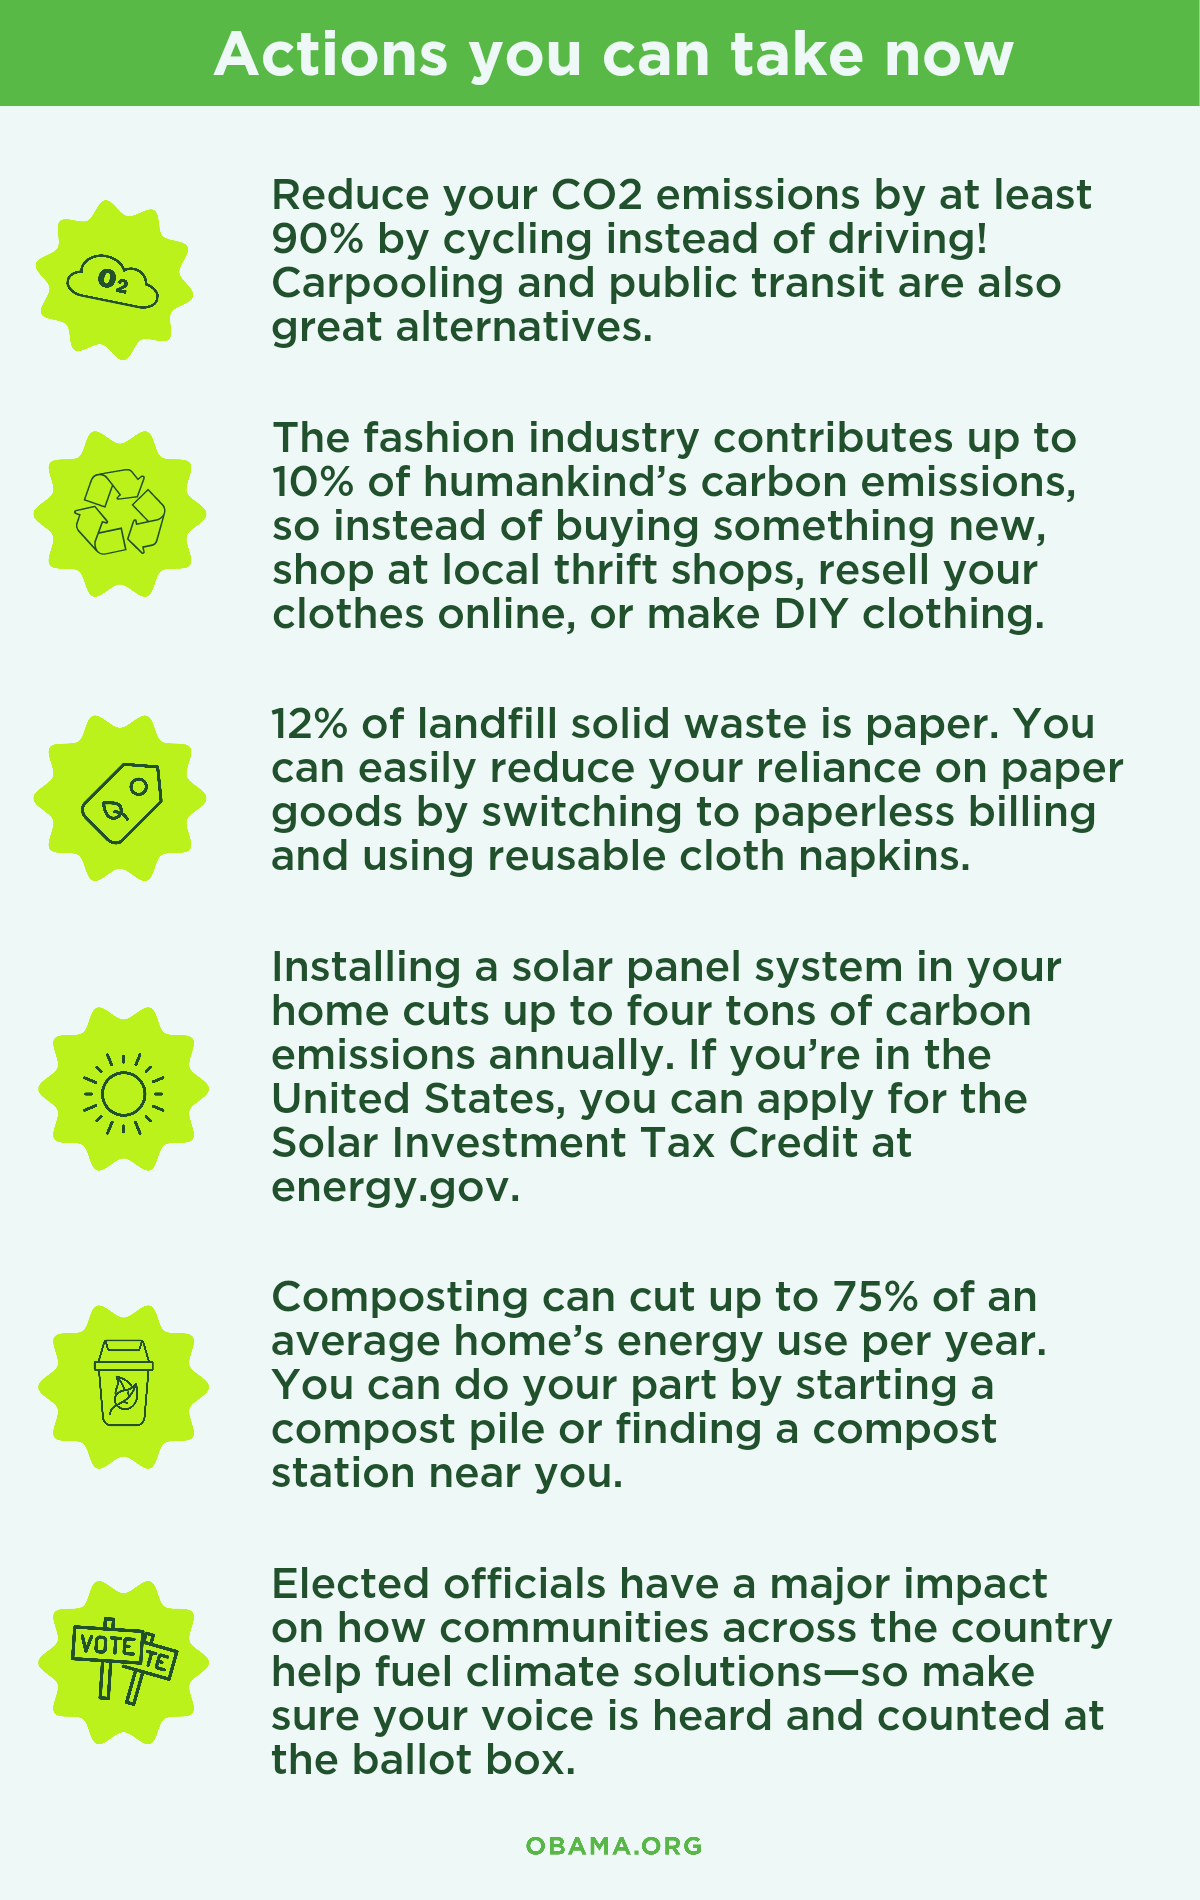 An infographic consisting of six actions you can take now which consist of the following: Here are a few actions you can take now:  Reduce your CO2 emissions by at least 90% by cycling instead of driving! Carpooling and public transit are also great alternatives.   The fashion industry contributes to 10% of humankind’s carbon emissions, so instead of buying something new, shop at local thrift shops, resell your clothes online, or make DIY clothing.  12% of landfill solid waste is paper. You can easily reduce your reliance on paper goods by switching to paperless billing and using reusable cloth napkins.   Installing a solar panel system in your home
 cuts up to four tons of carbon emissions annually.  If you’re in the United States, you can apply for the Solar Investment Tax Credit at energy.gov.   Composting can cut up to 75% of an average home’s energy use per year. You can do your part by starting a compost pile or finding a compost station near you.  Elected officials have a major impact on how communities across the country help fuel climate solutions—so make sure your voice is heard and counted at the ballot box.